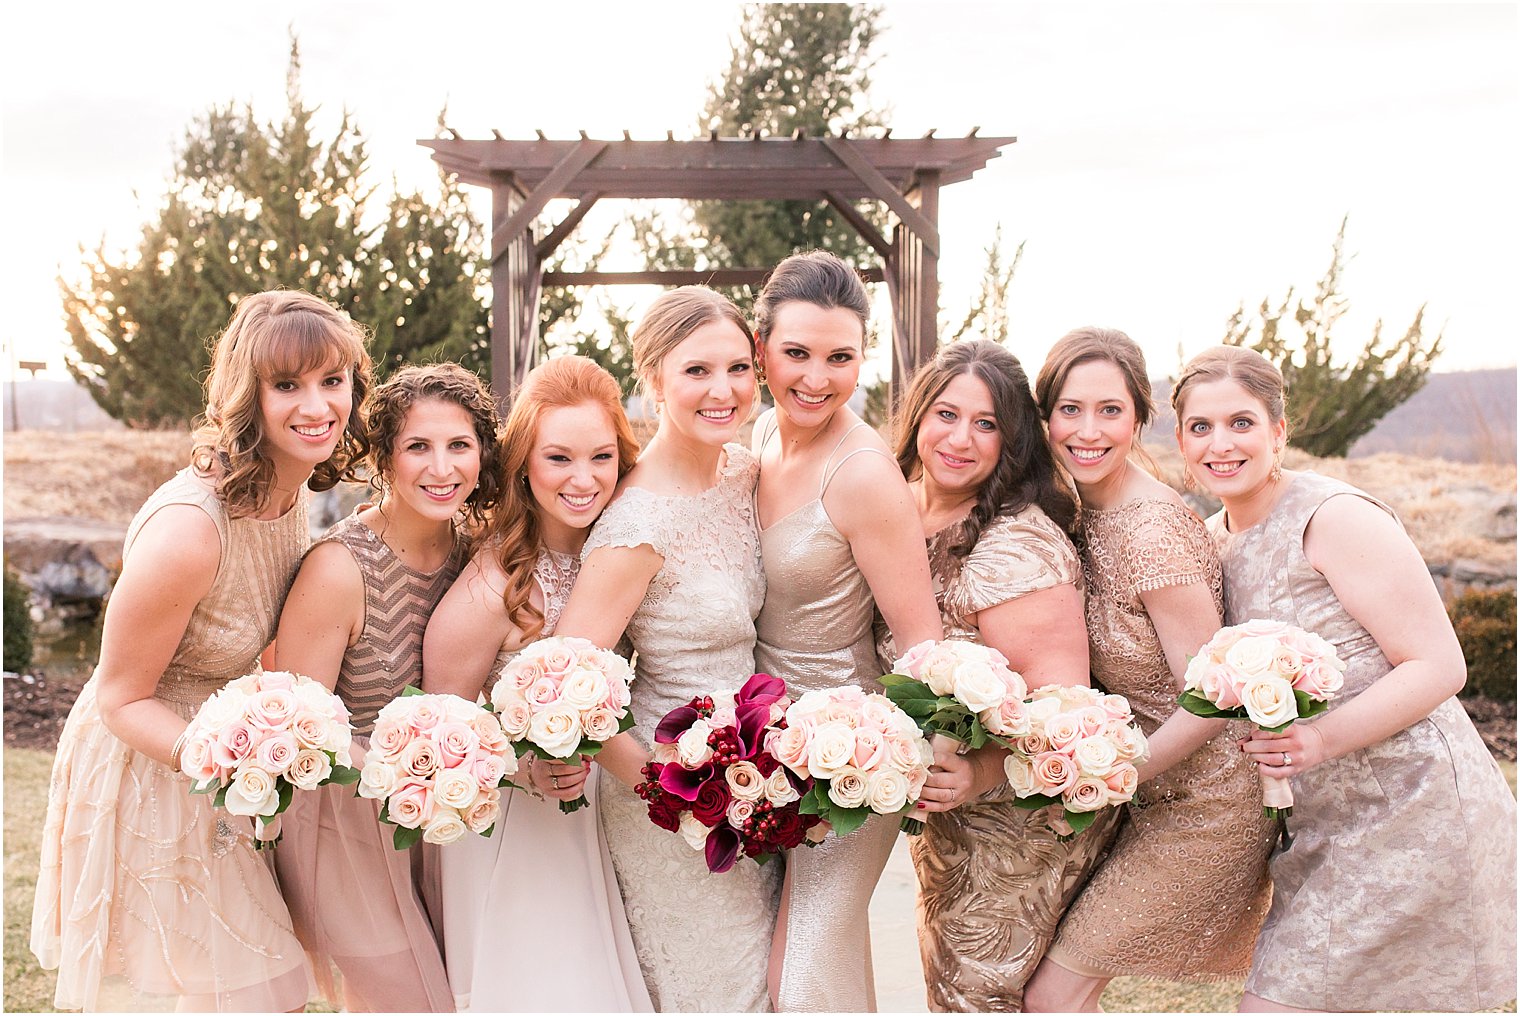 Bridesmaids in champagne dresses | Photo by Idalia Photography